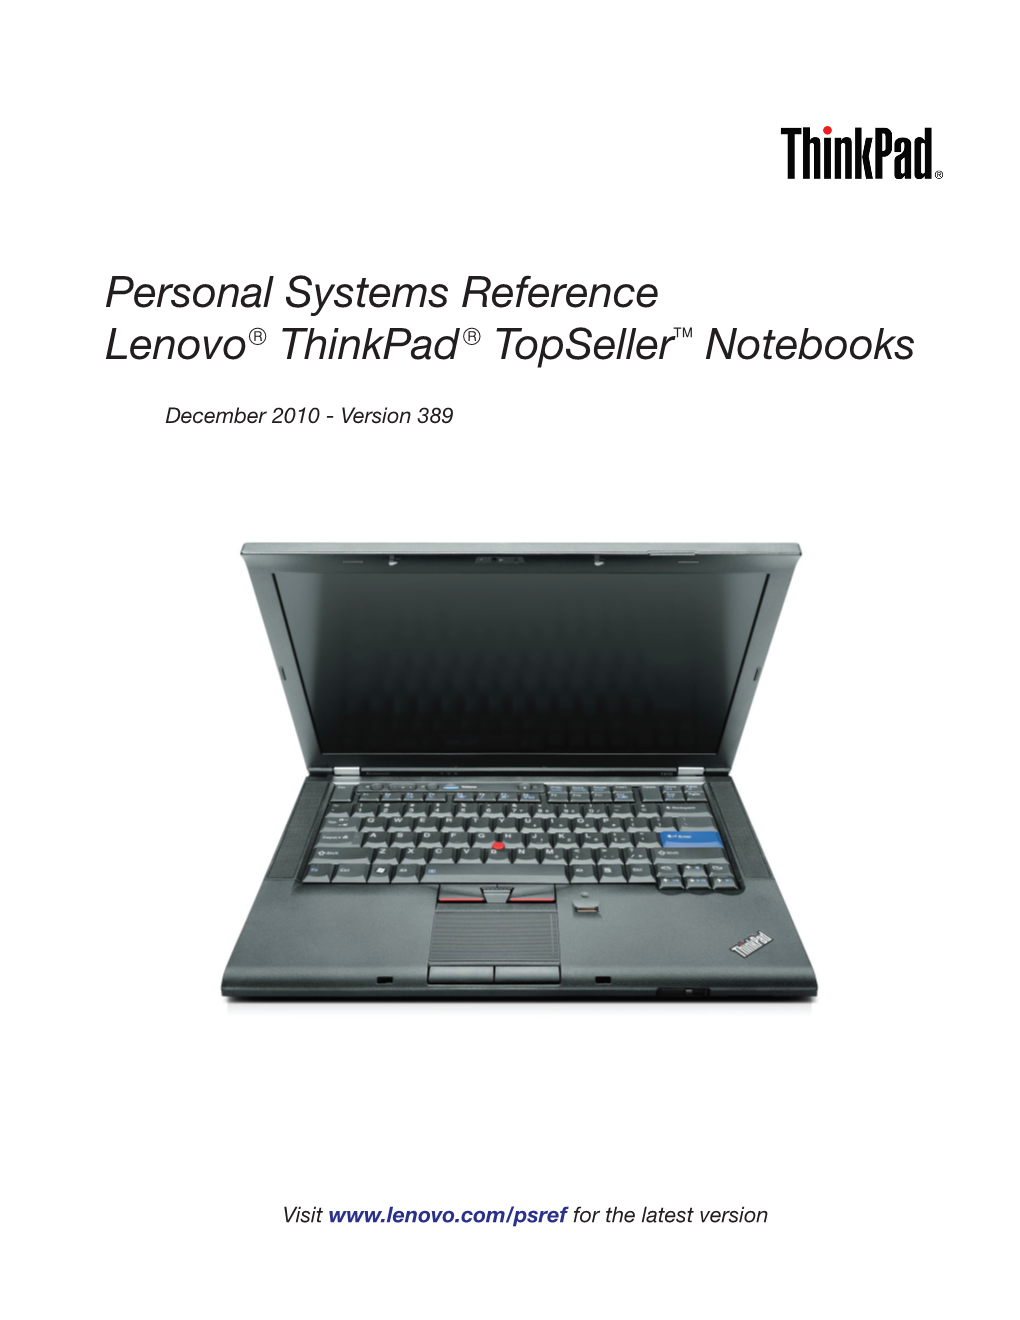 Personal Systems Reference Lenovo Thinkpad Topseller Notebooks